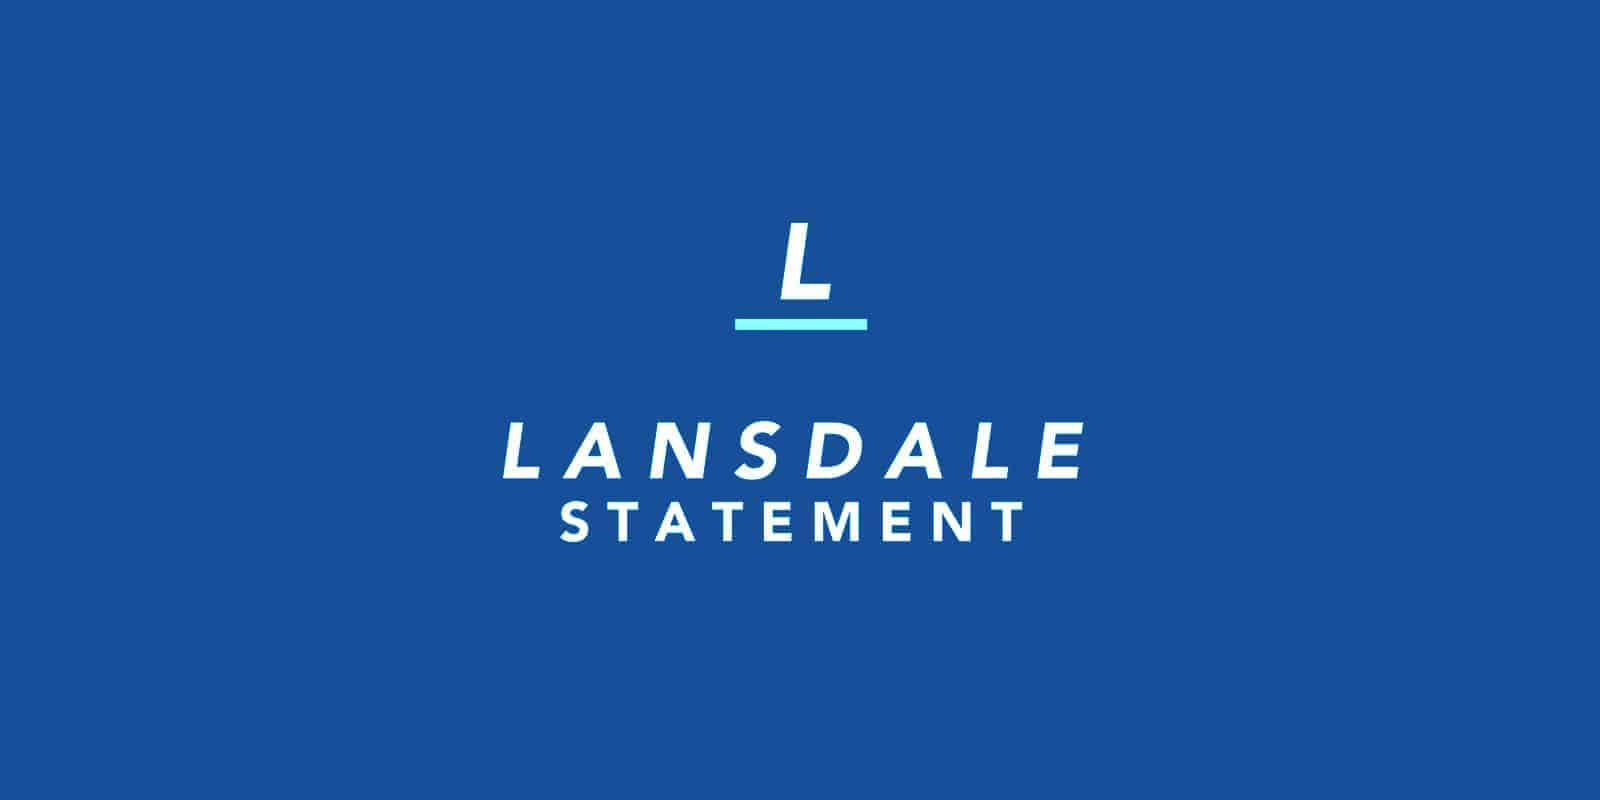 Lansdale Statement (see what I did there? get it?)